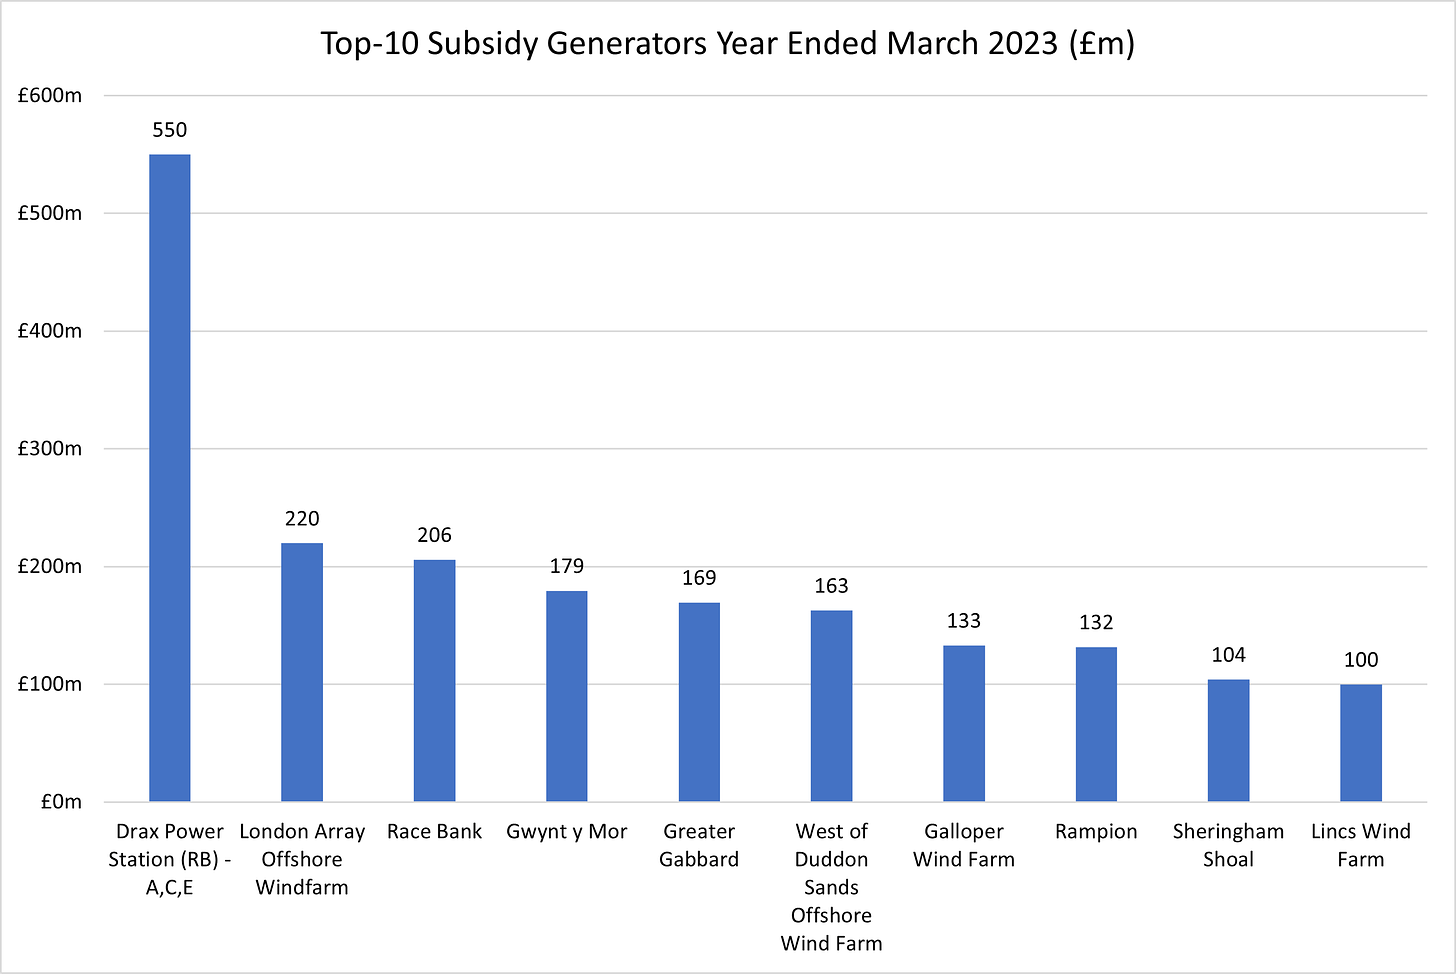 Figure 6 - Top-10 Subsidy Generators in Year to end March 2023 (£m)